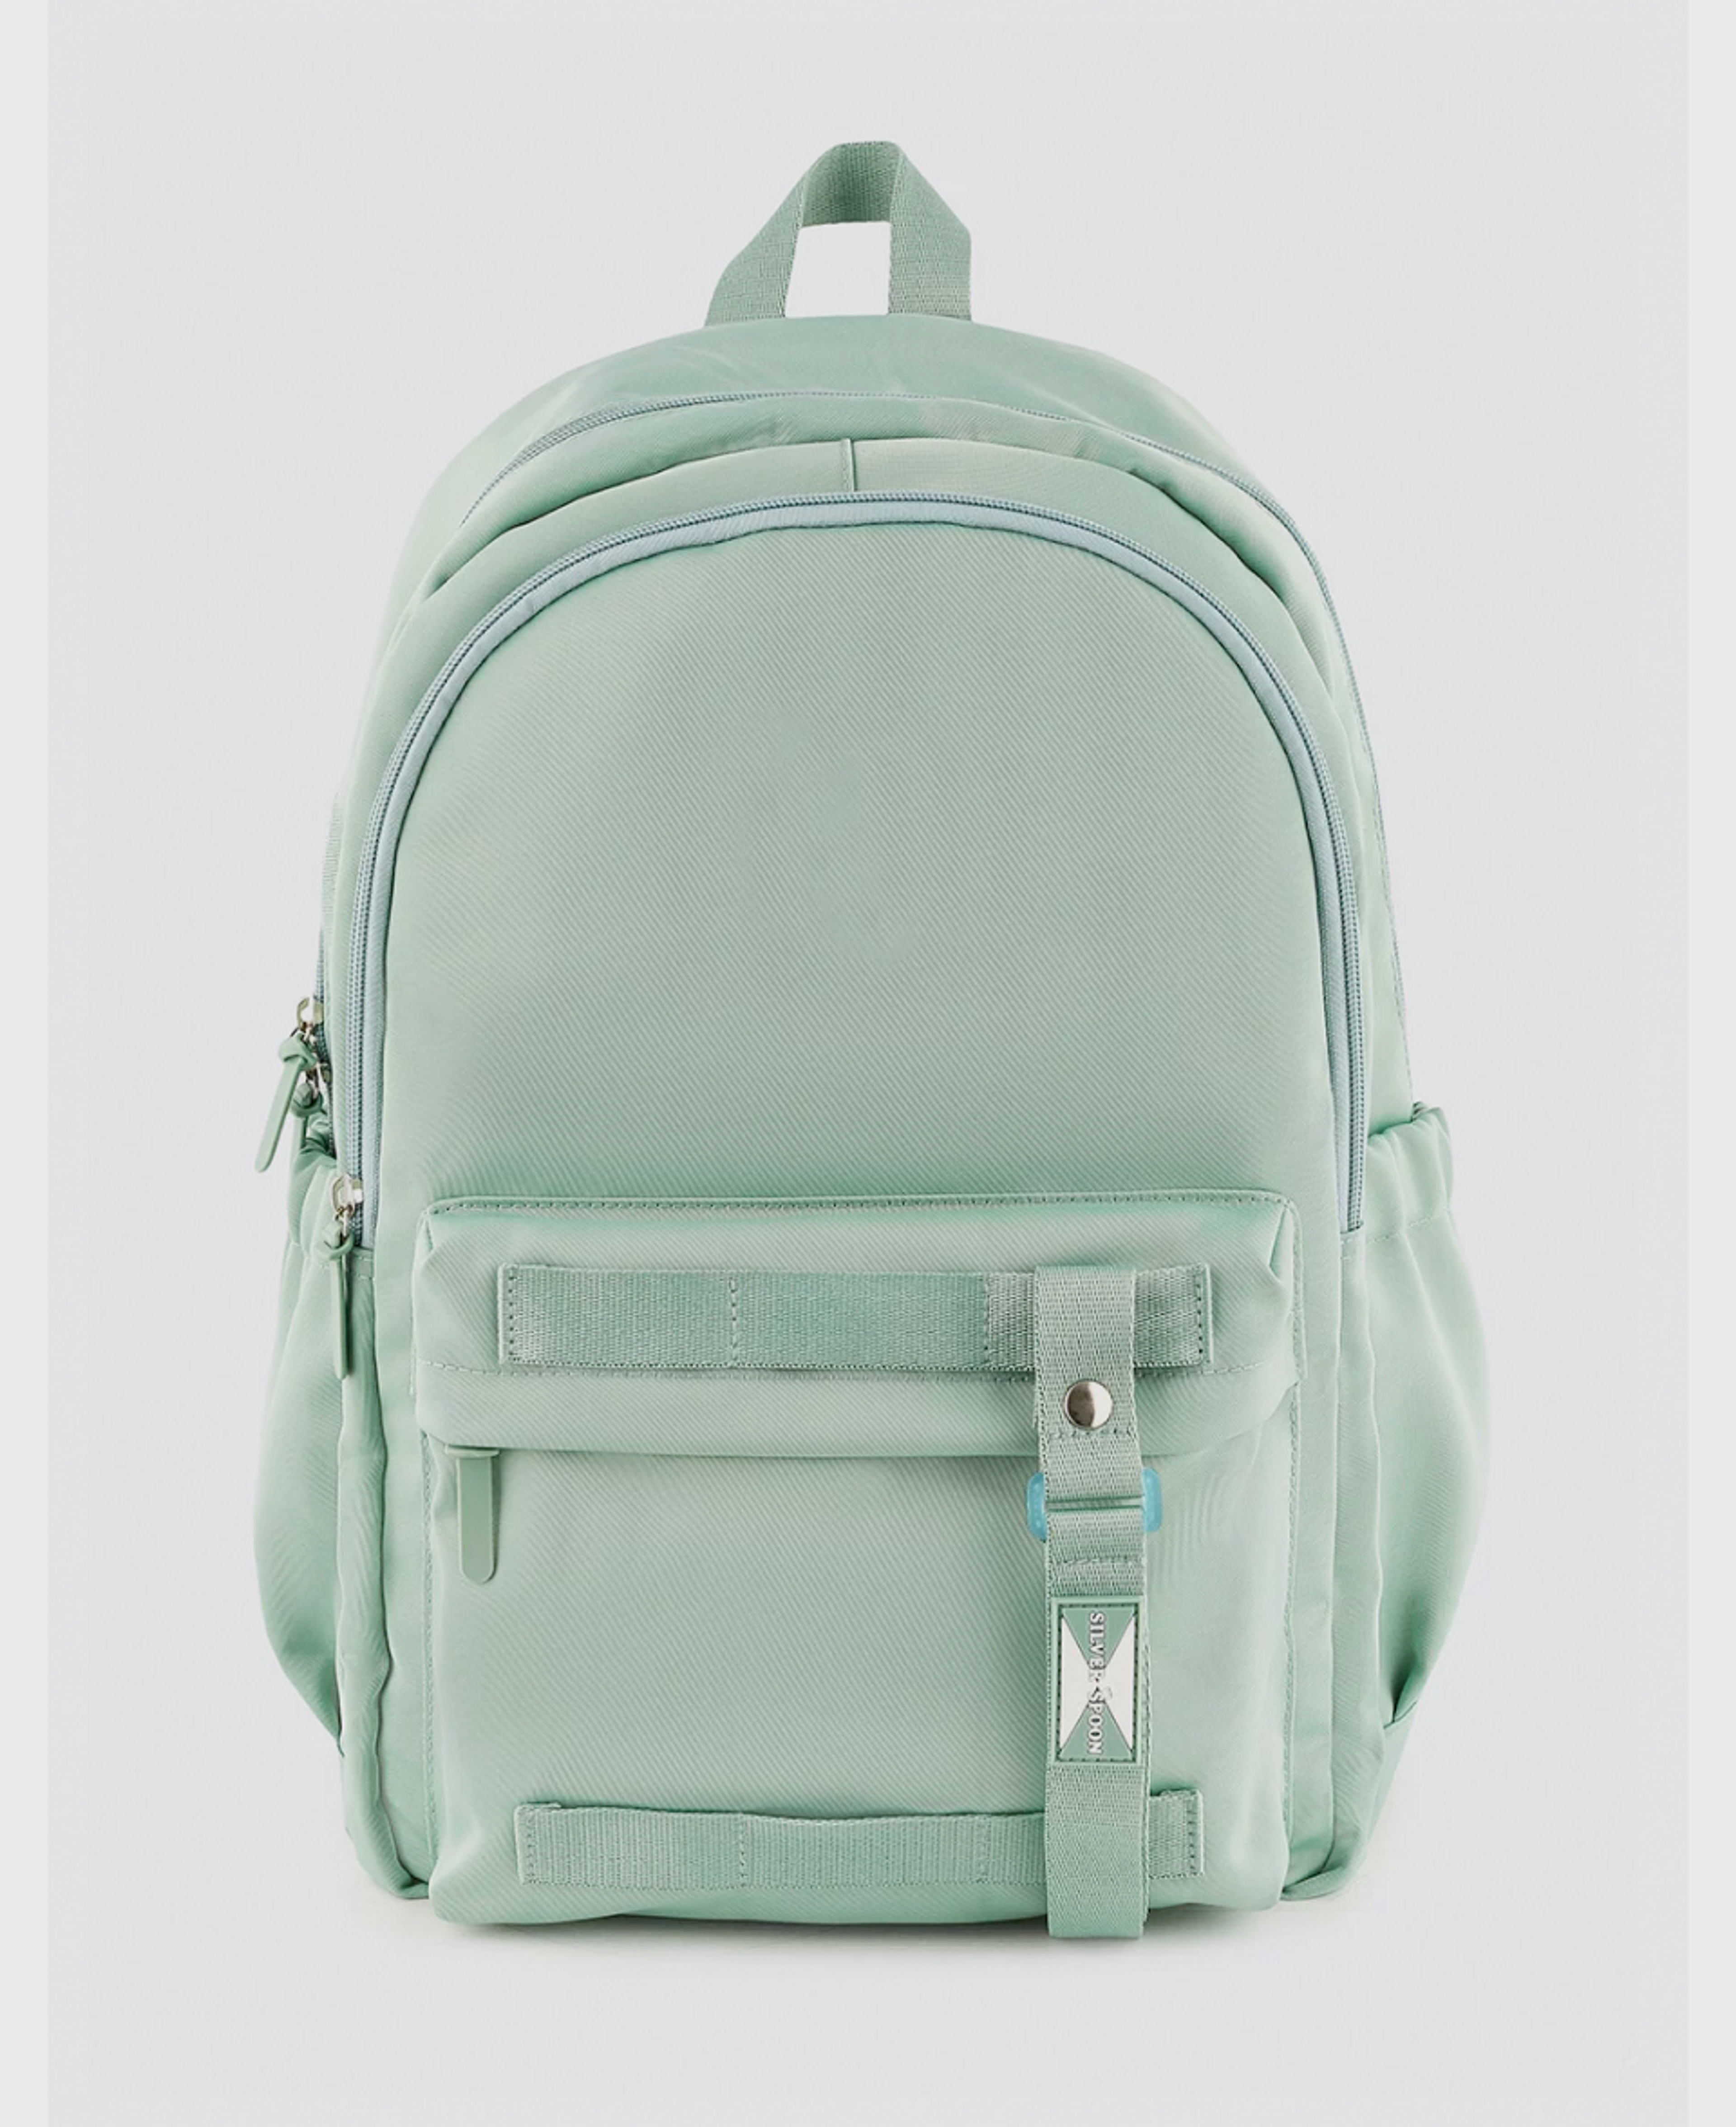 Рюкзак Silver Spoon Backpack